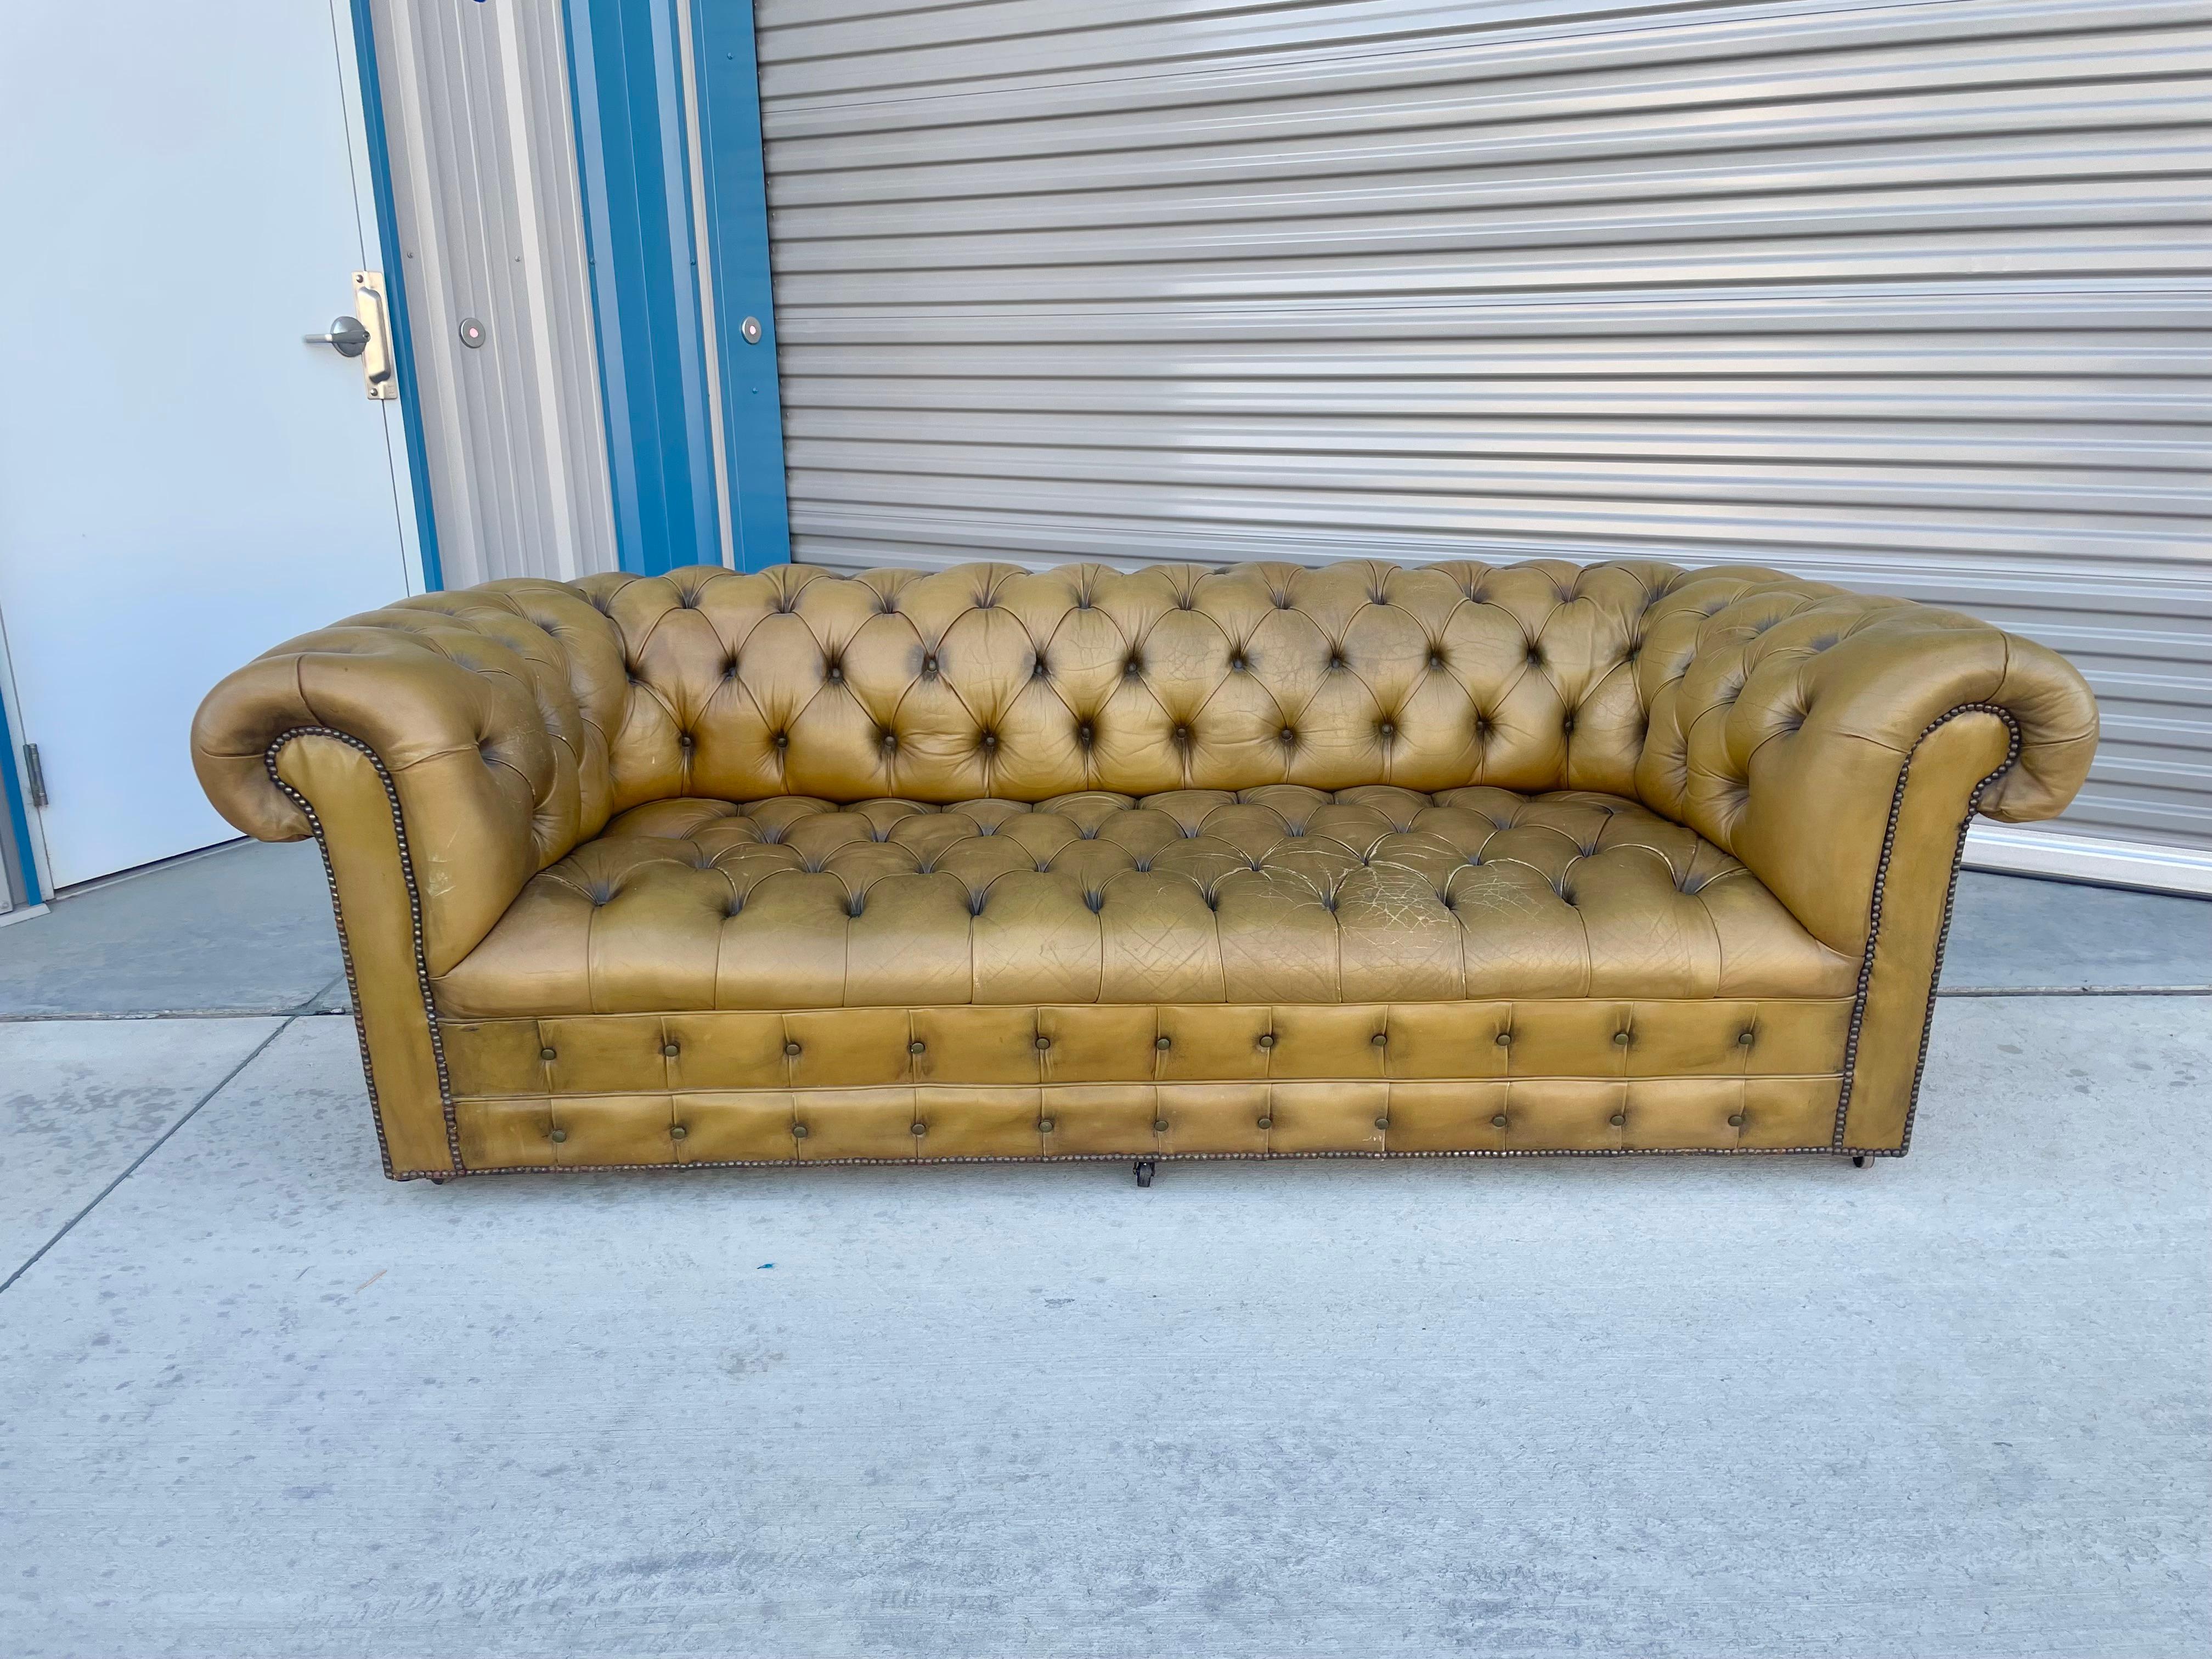 Vintage leather Chesterfield sofa designed and manufactured in the United States circa 1970s. This stunning sofa features a leather tufted upholstery that gives it a classic and timeless look. I absolutely love its unique design and how comfortable